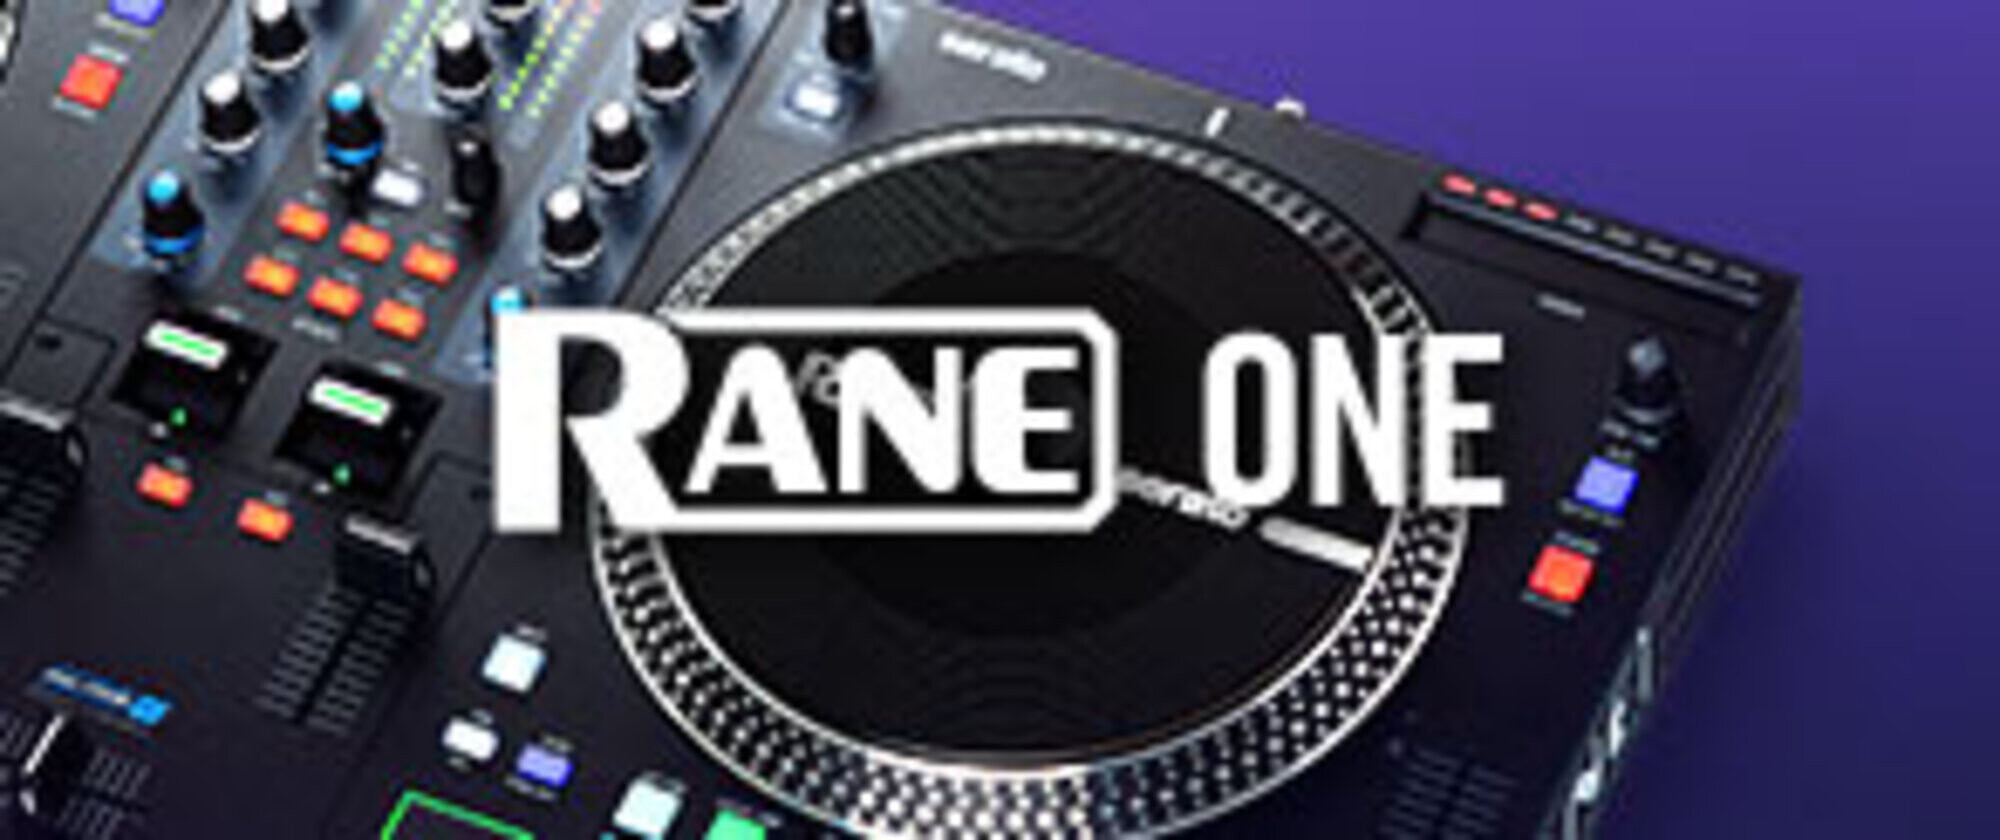 The RANE ONE is Real